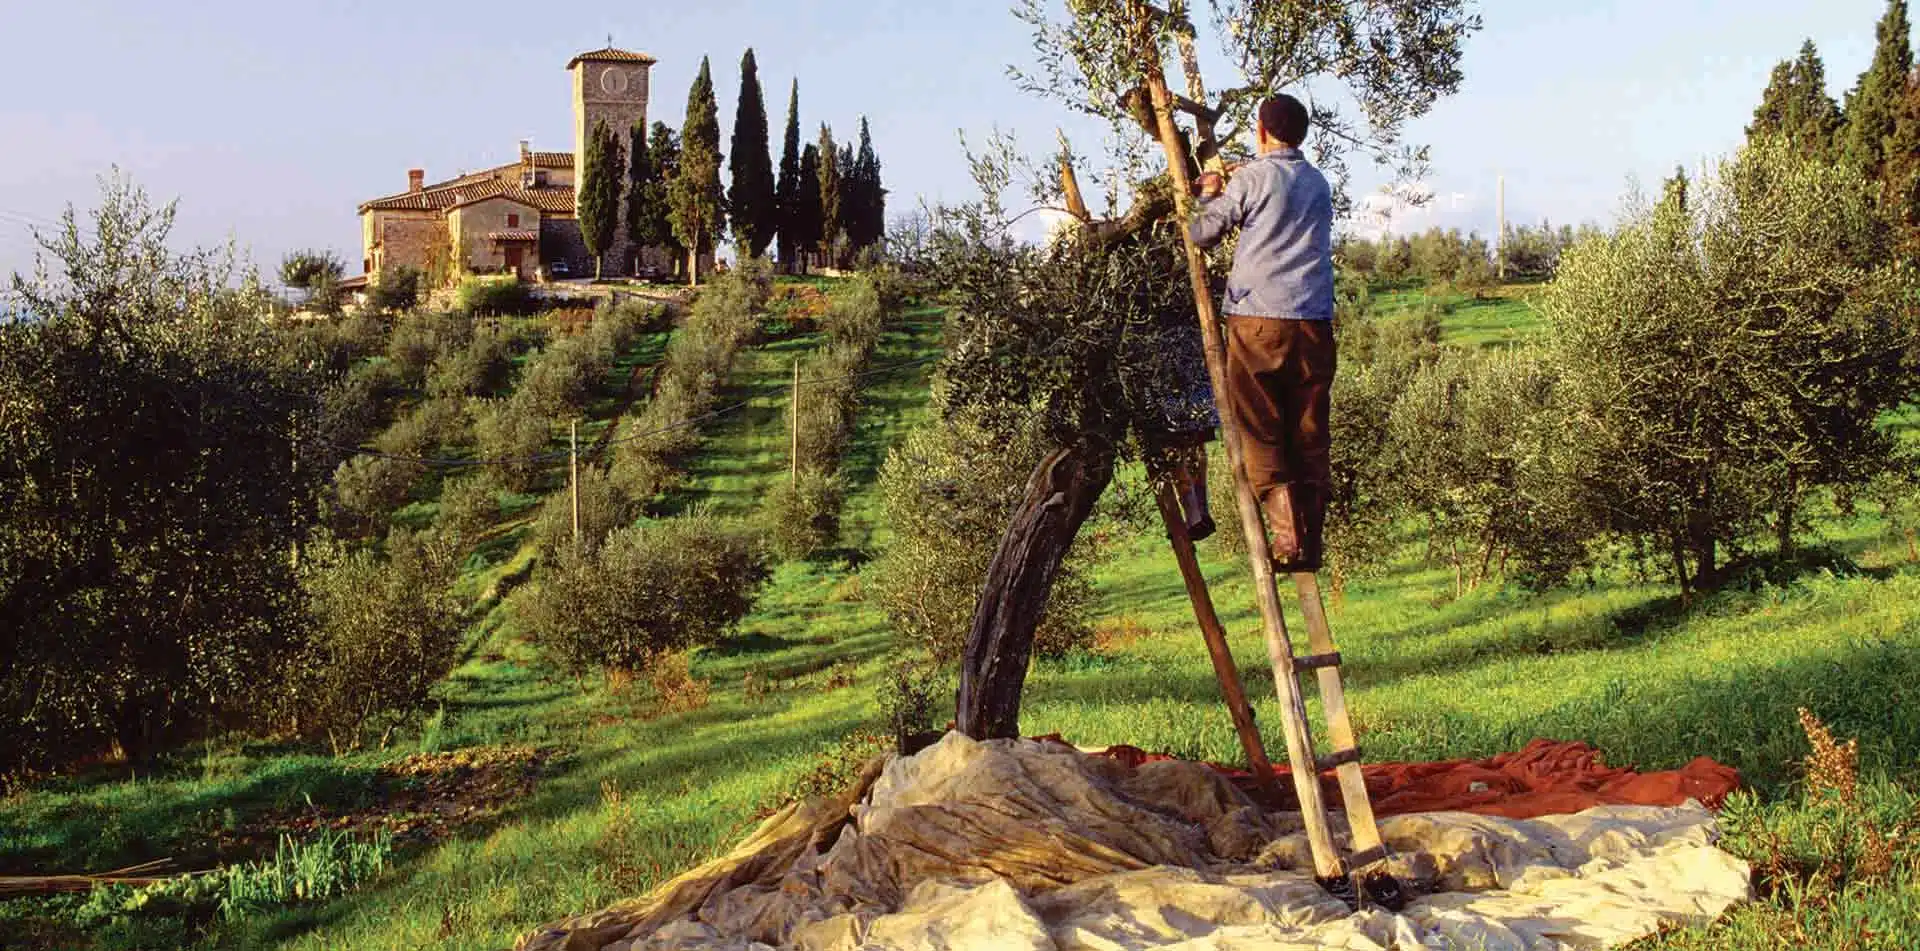 Man on ladder in the Countryside of Italy